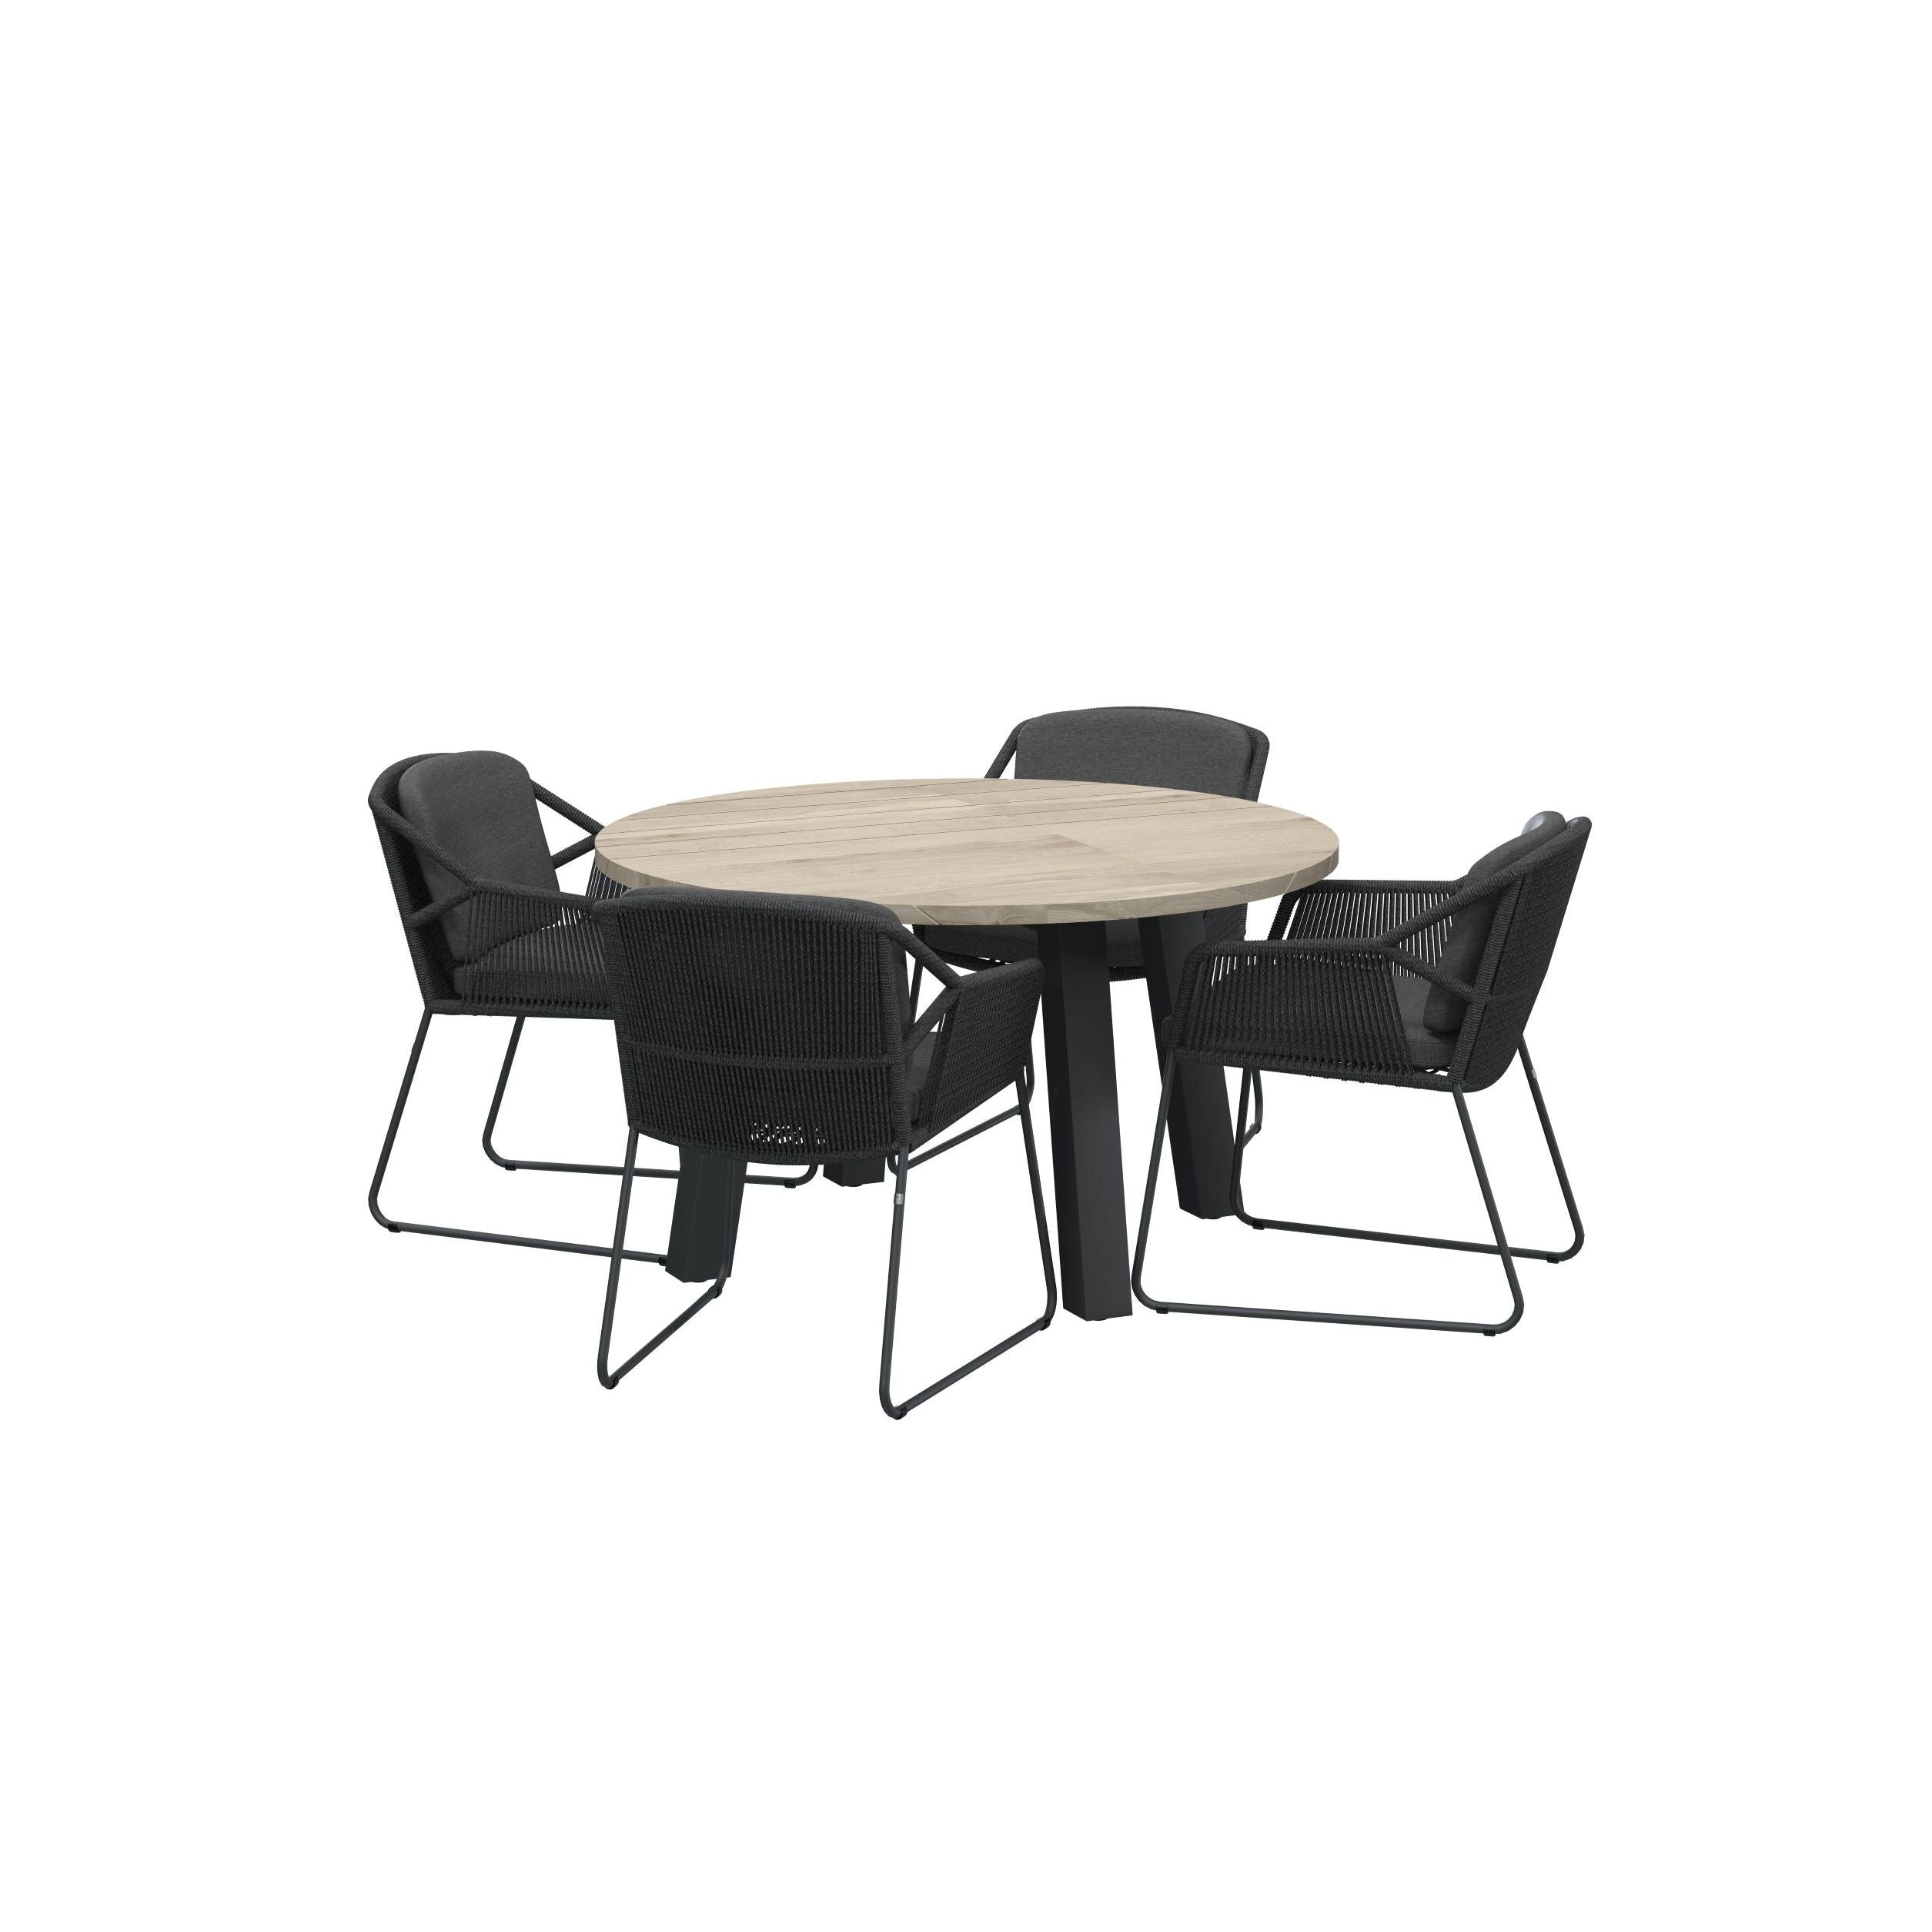 4 Seasons Outdoor Accor 4 Seater Dining Set with Derby Table and Teak top